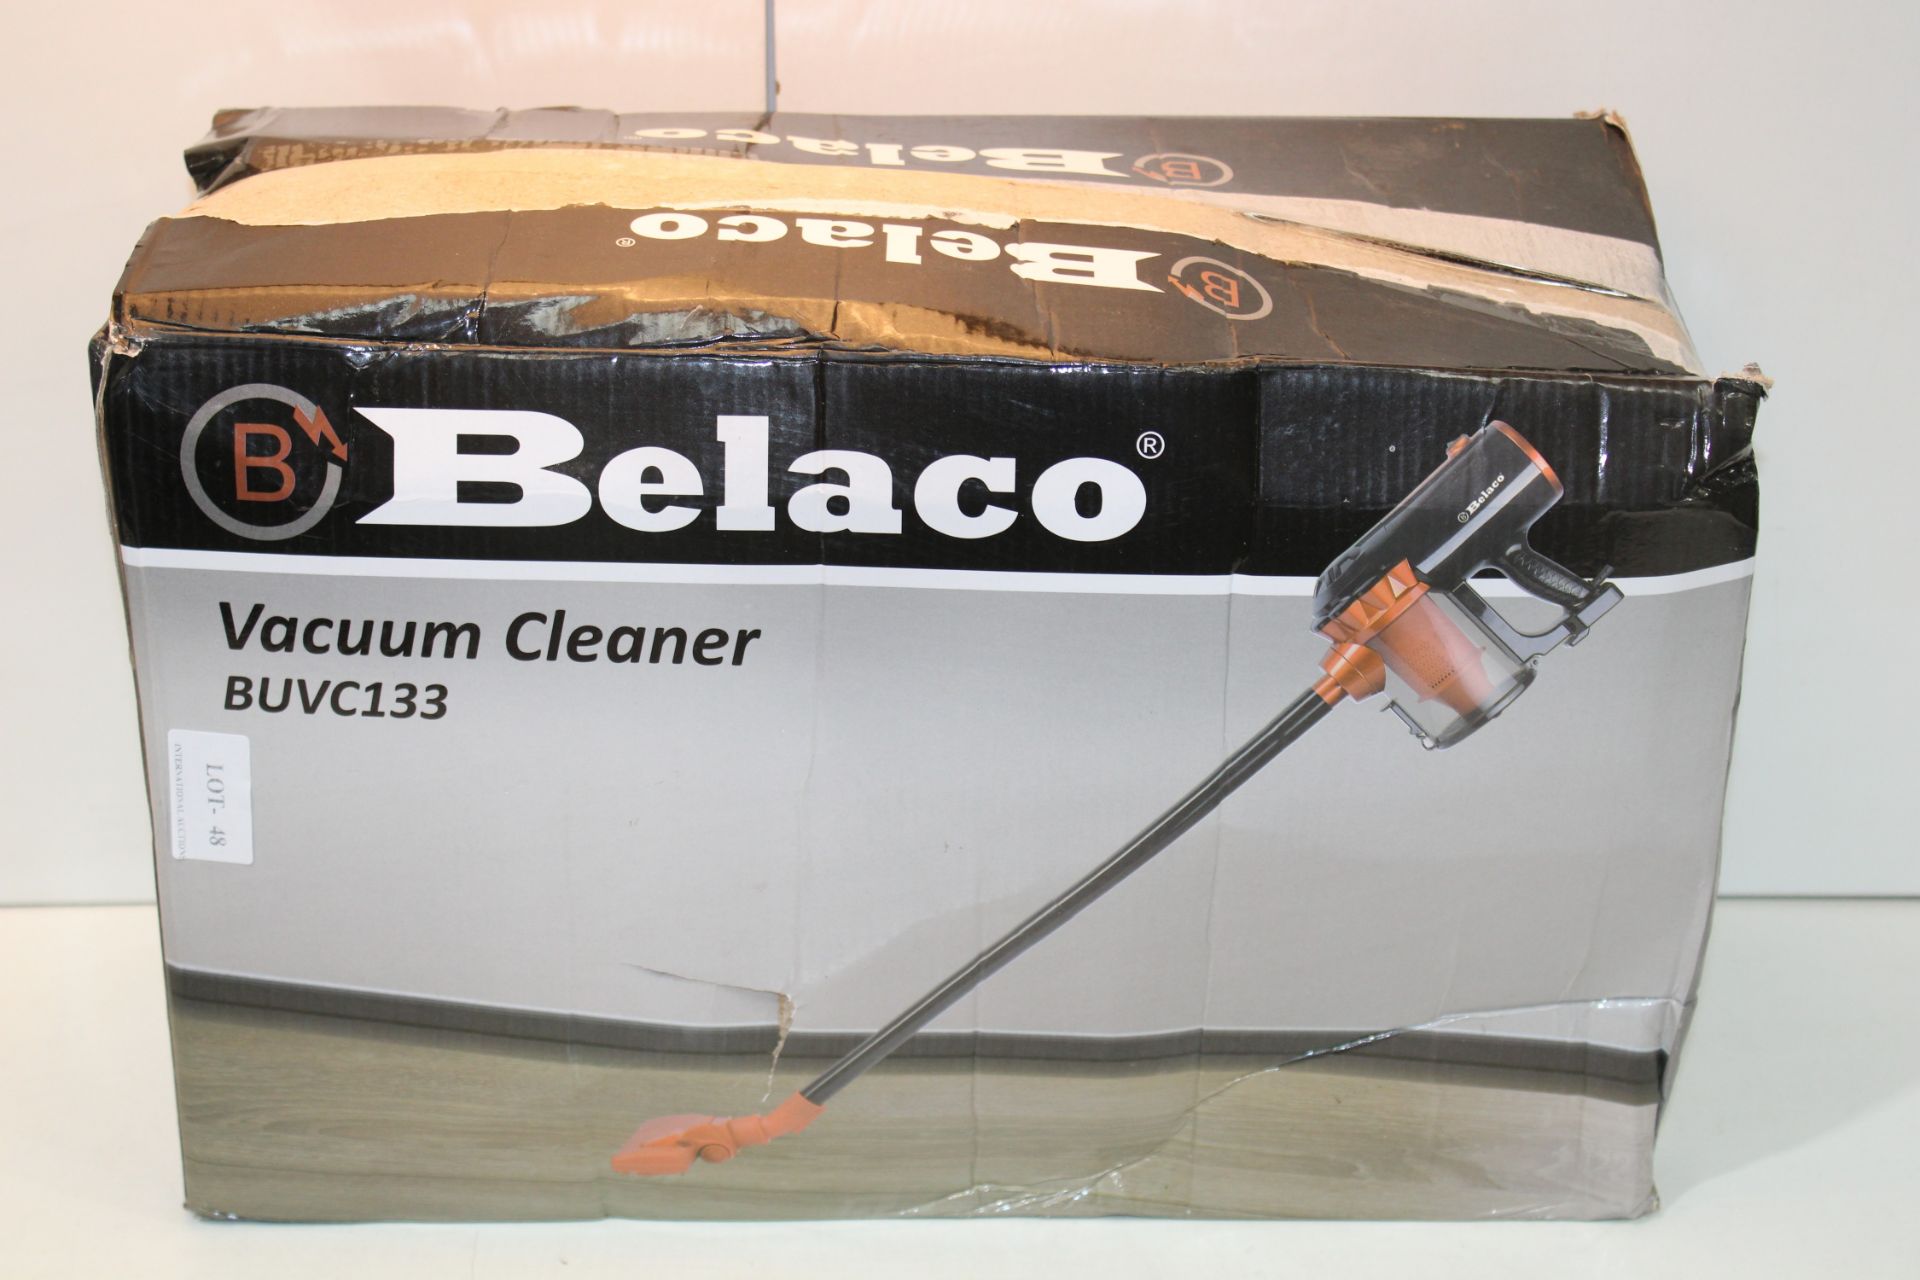 BOXED BELACO VACUUM CLEANER BUVC133 RRP £49.00Condition ReportAppraisal Available on Request- All